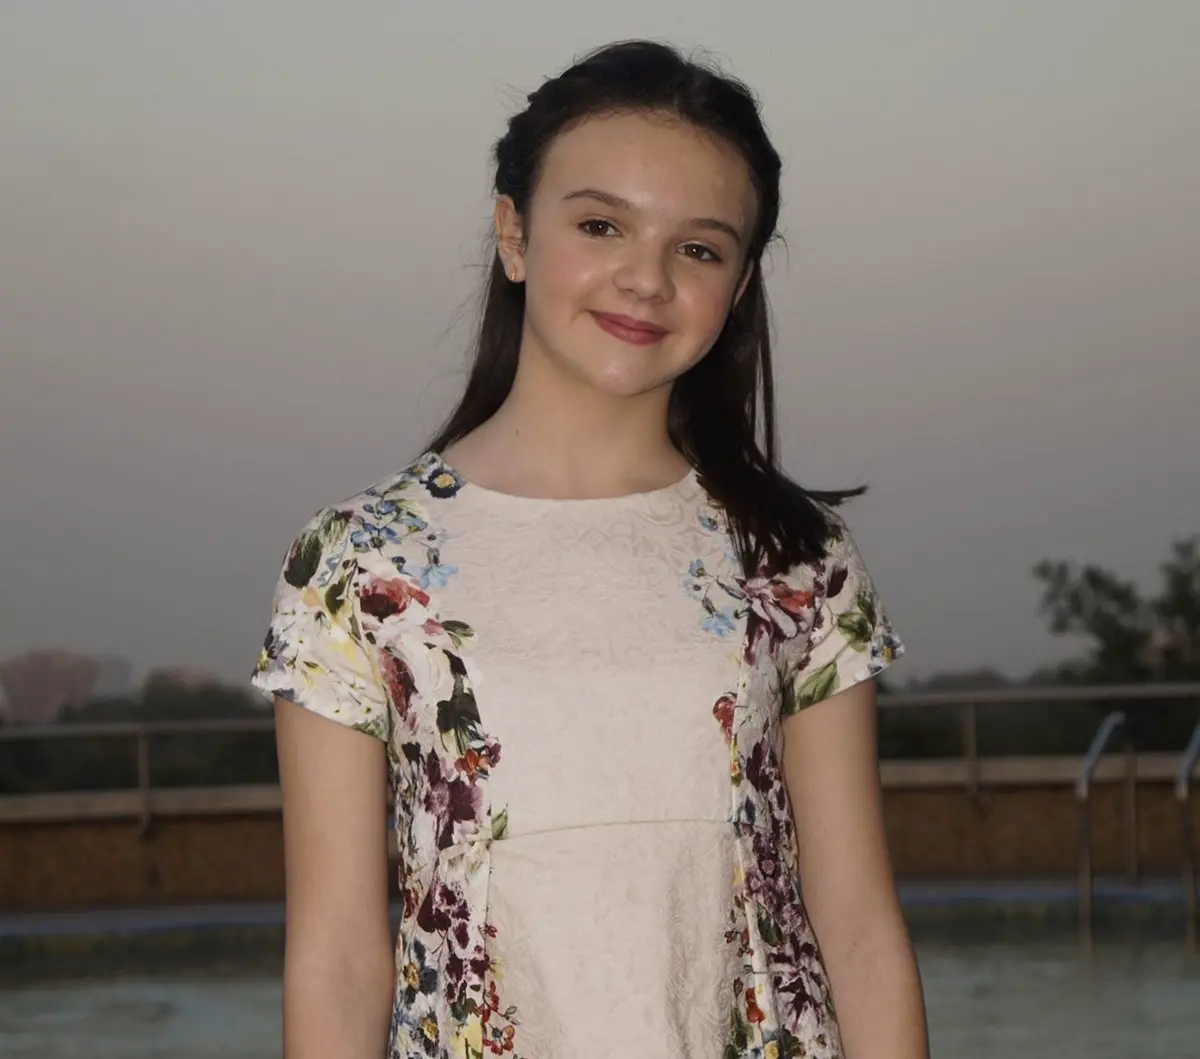 Abigail Eames wiki, age, height, movies, tv shows, family, education